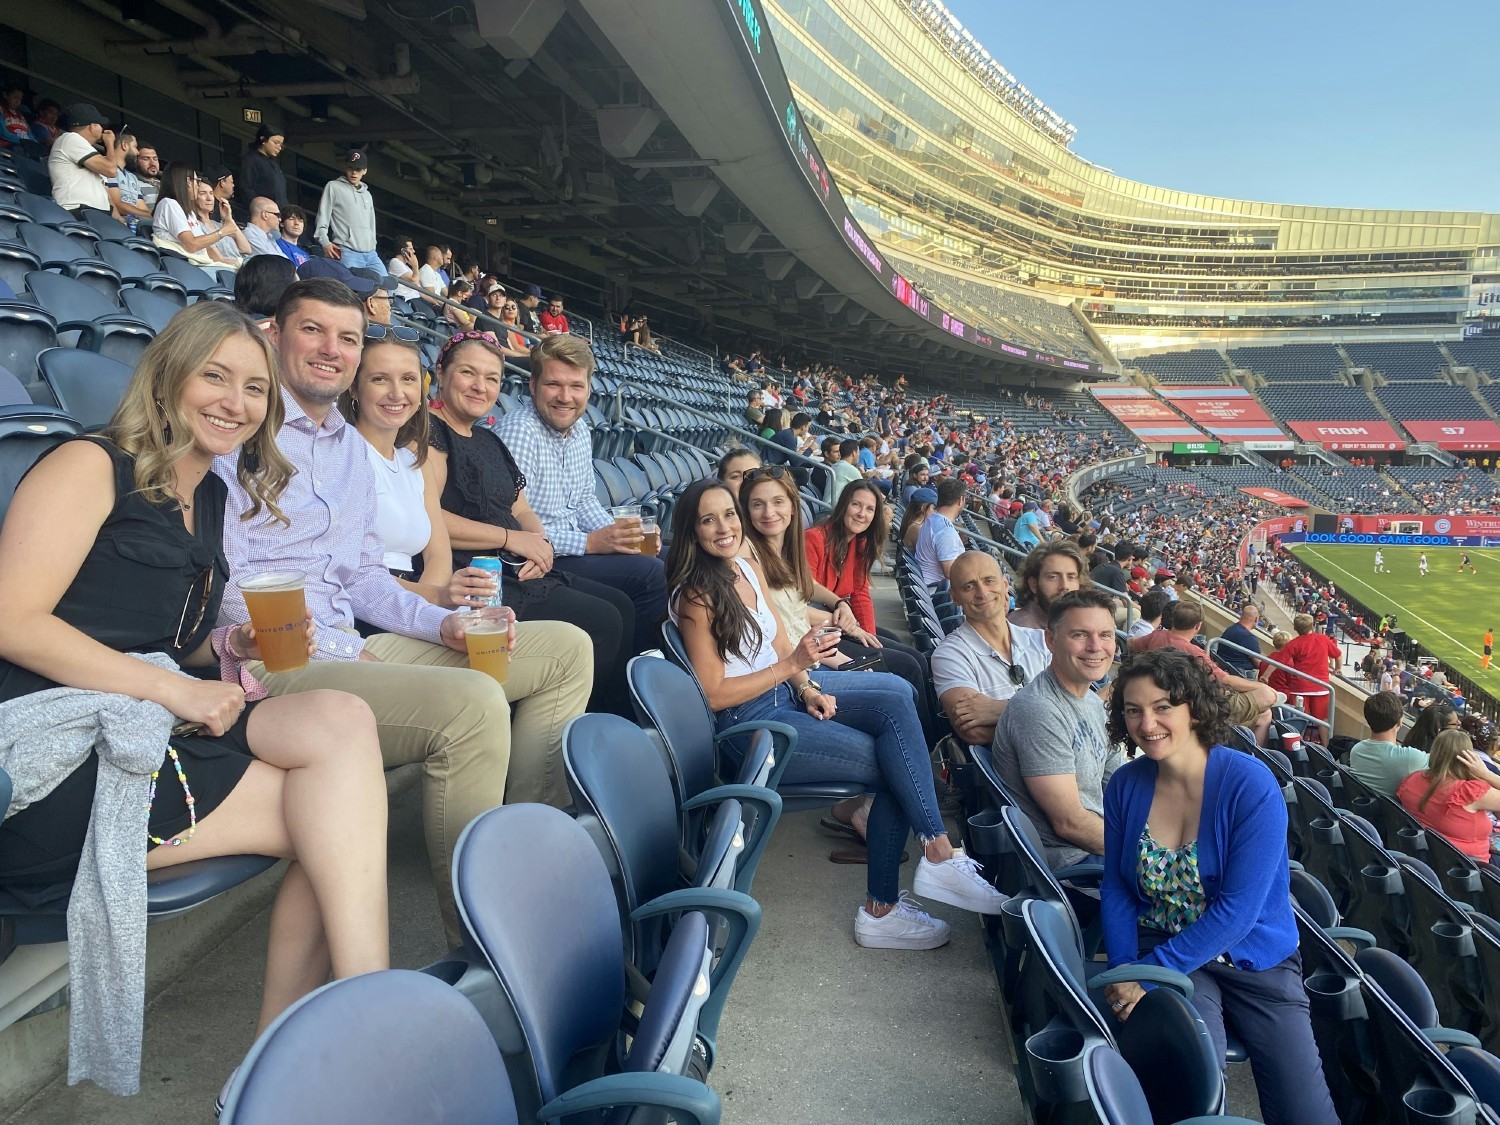 Sprocket Sports enjoying a team outing after work at the Chicago Fire FC game at Soldier Field.